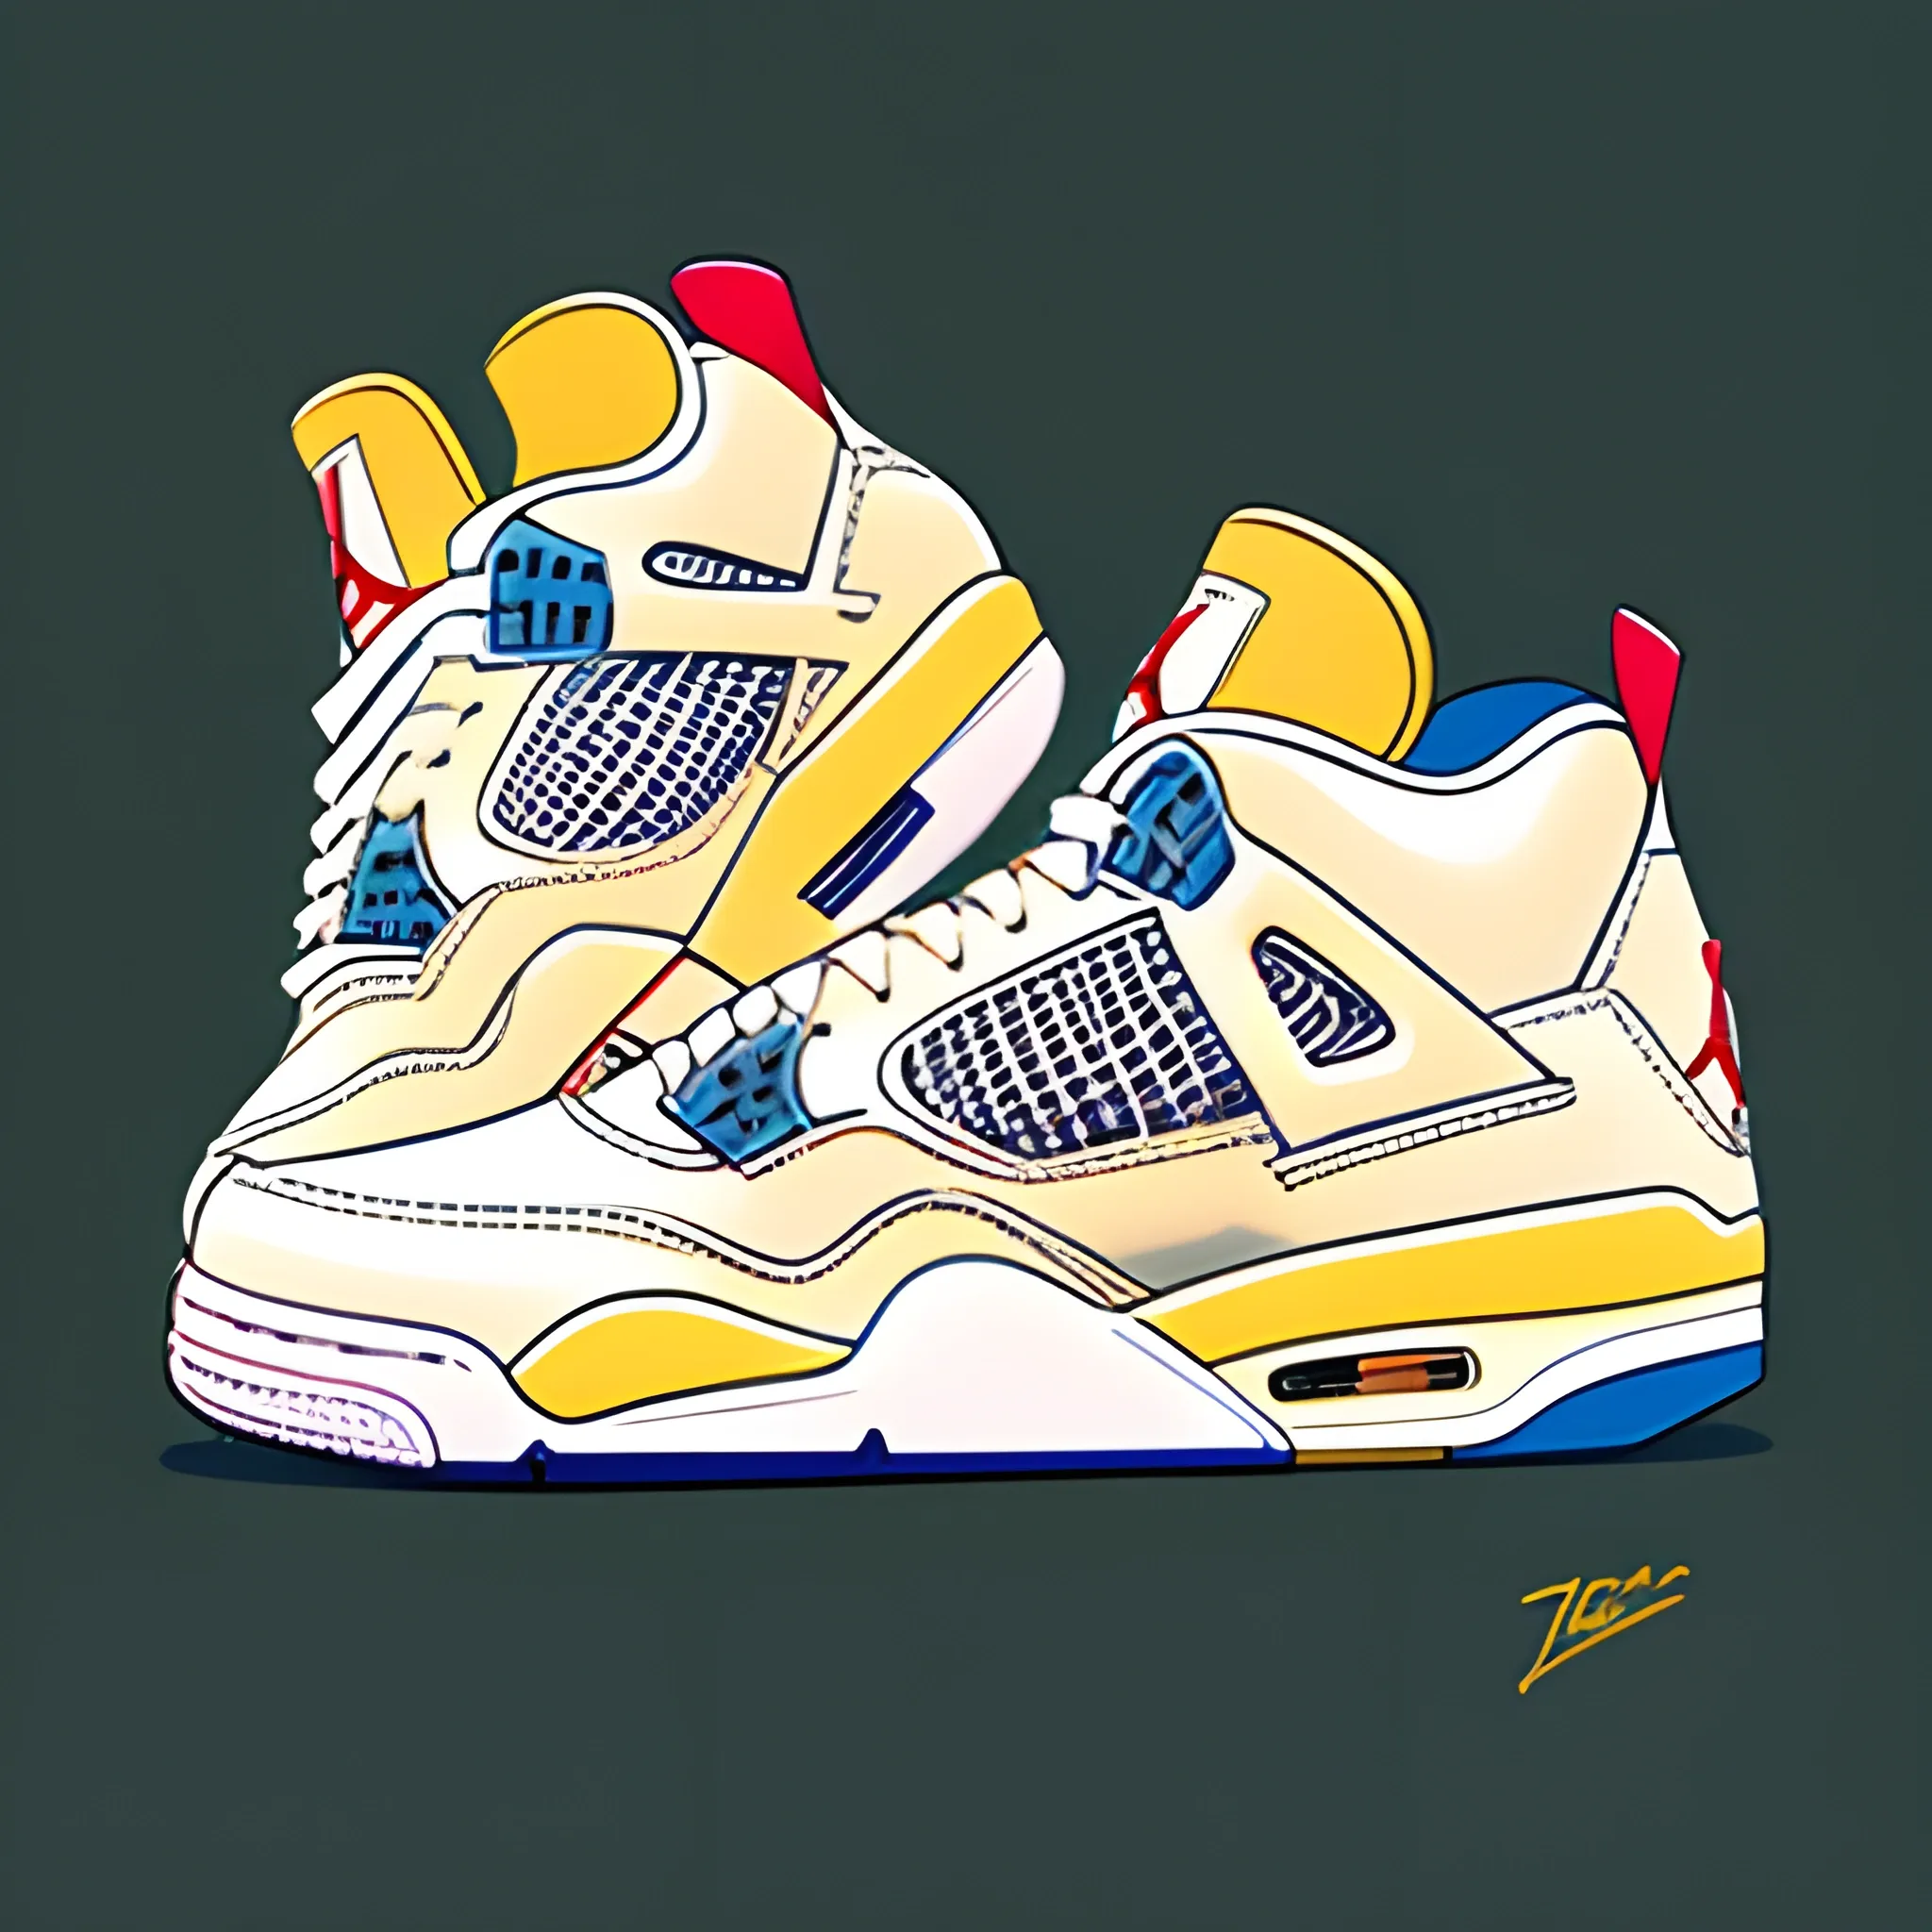 Jordan shoes retro 4 palomino in the style of a 50s by Frank Ham ...